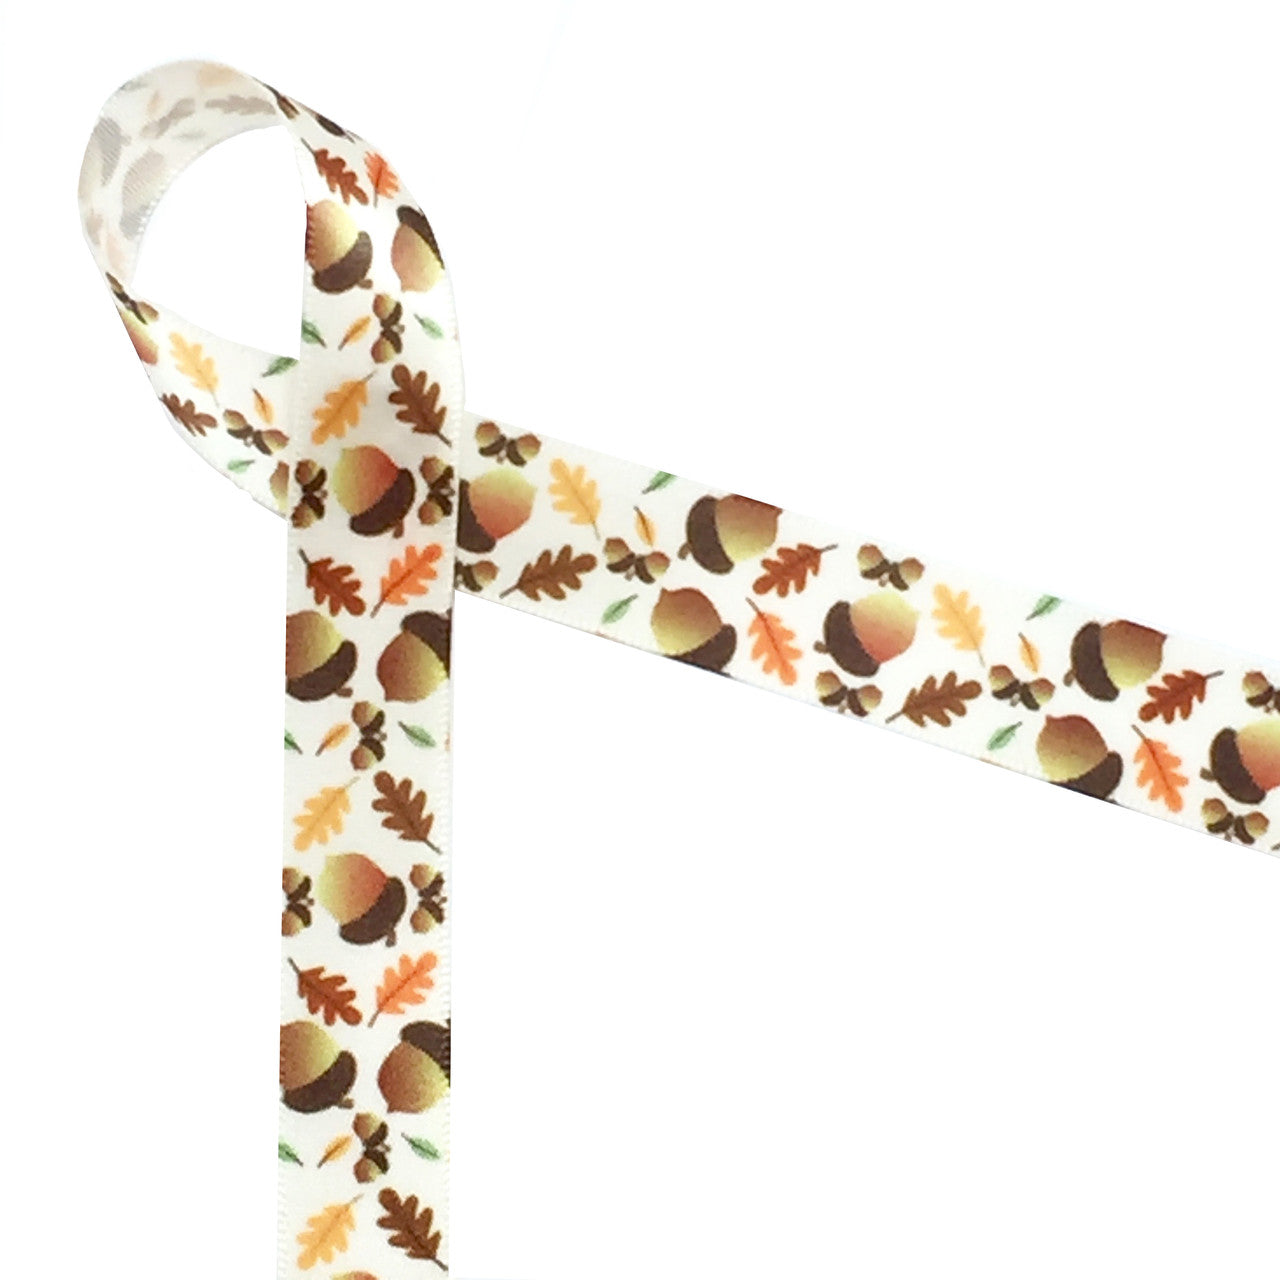 Acorns tossed with colorful oak leaves on a 5/8" antique white single face satin bring forth all the wonderful memories of Fall! This lovely ribbon can be used for party favors, floral design, gift wrap, gift baskets, table decor, cookies, cake pops and candy shops. This is a great ribbon for Fall crafts, quilting and sewing projects too. All our ribbon is designed and printed in the USA